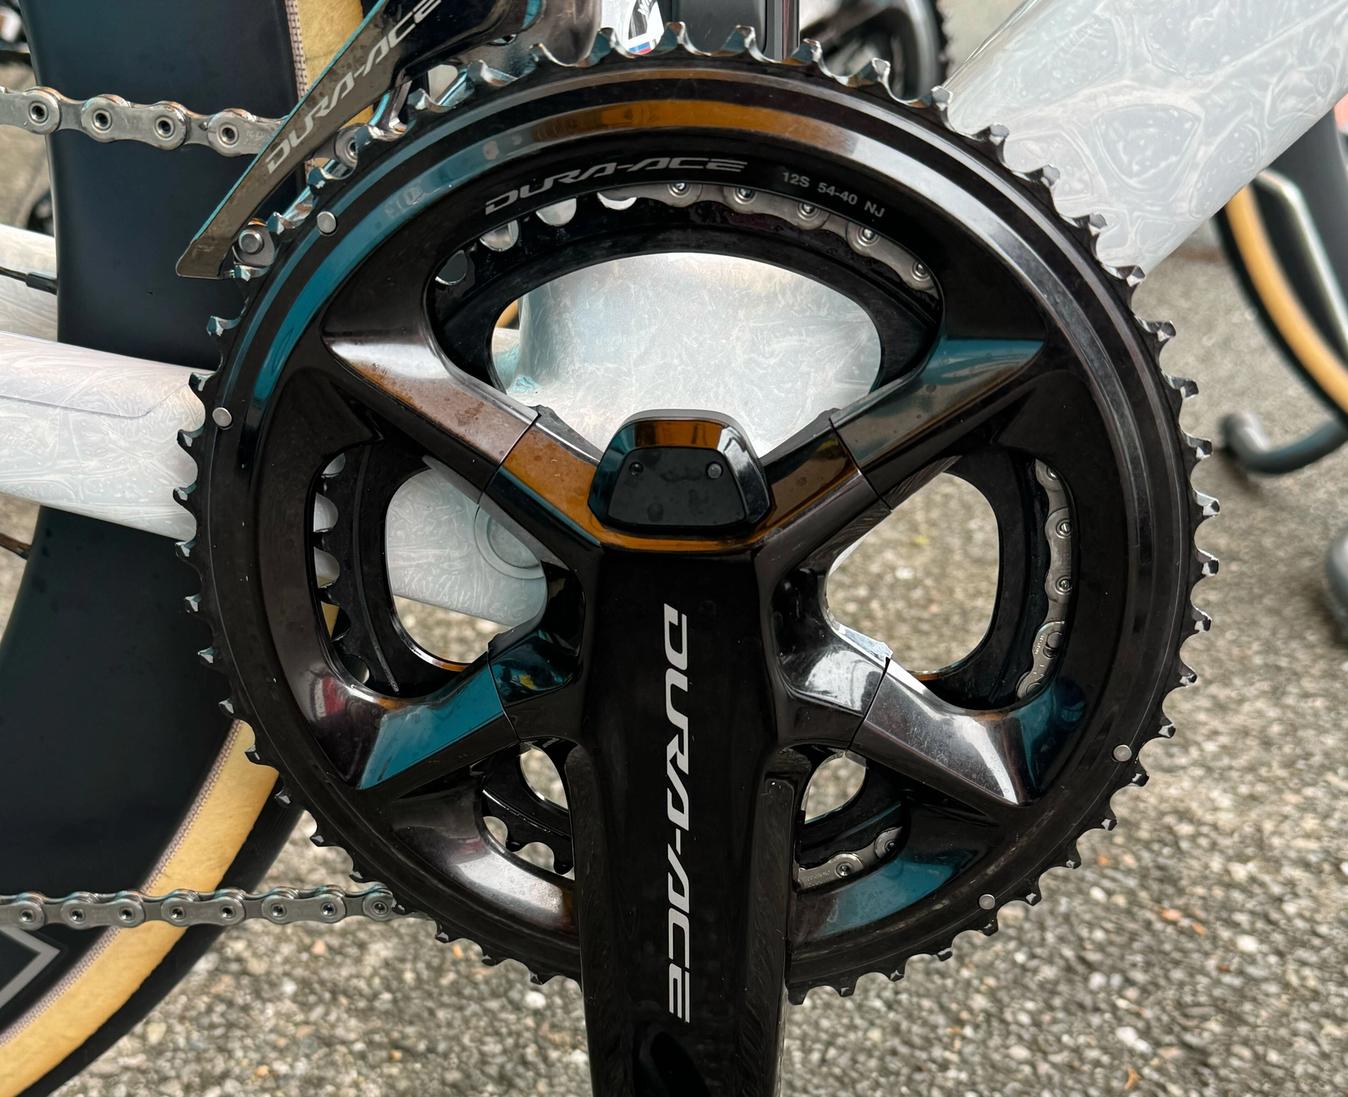 Mulubrhan kept things simple with a standard 54/40-tooth crankset